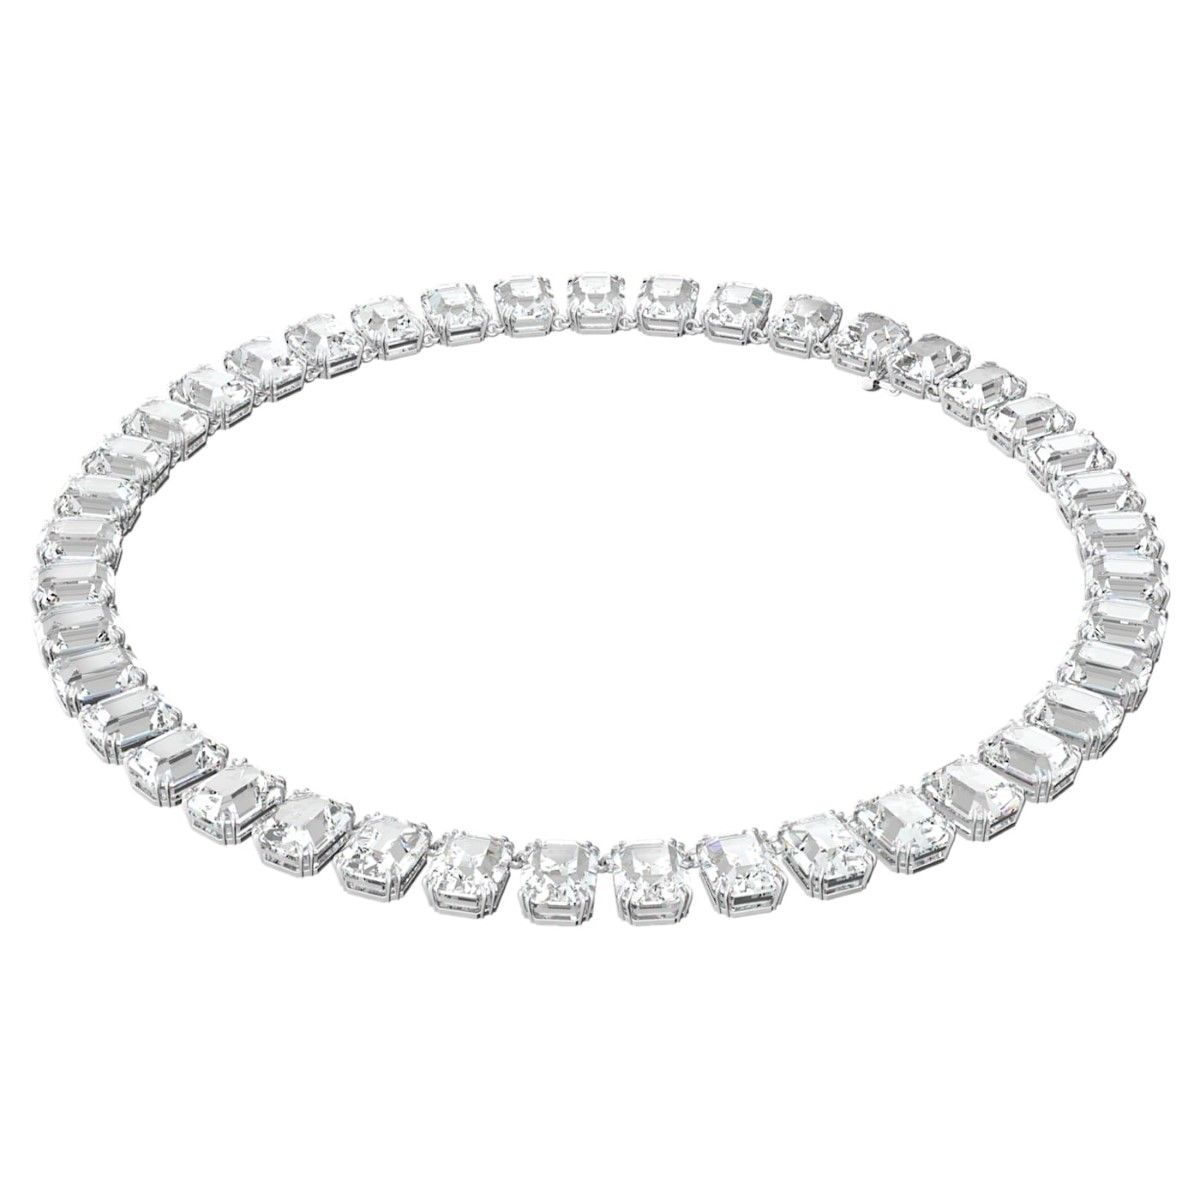 Buy Swarovski Millenia Necklace Octagon Cut Crystals - White with ...